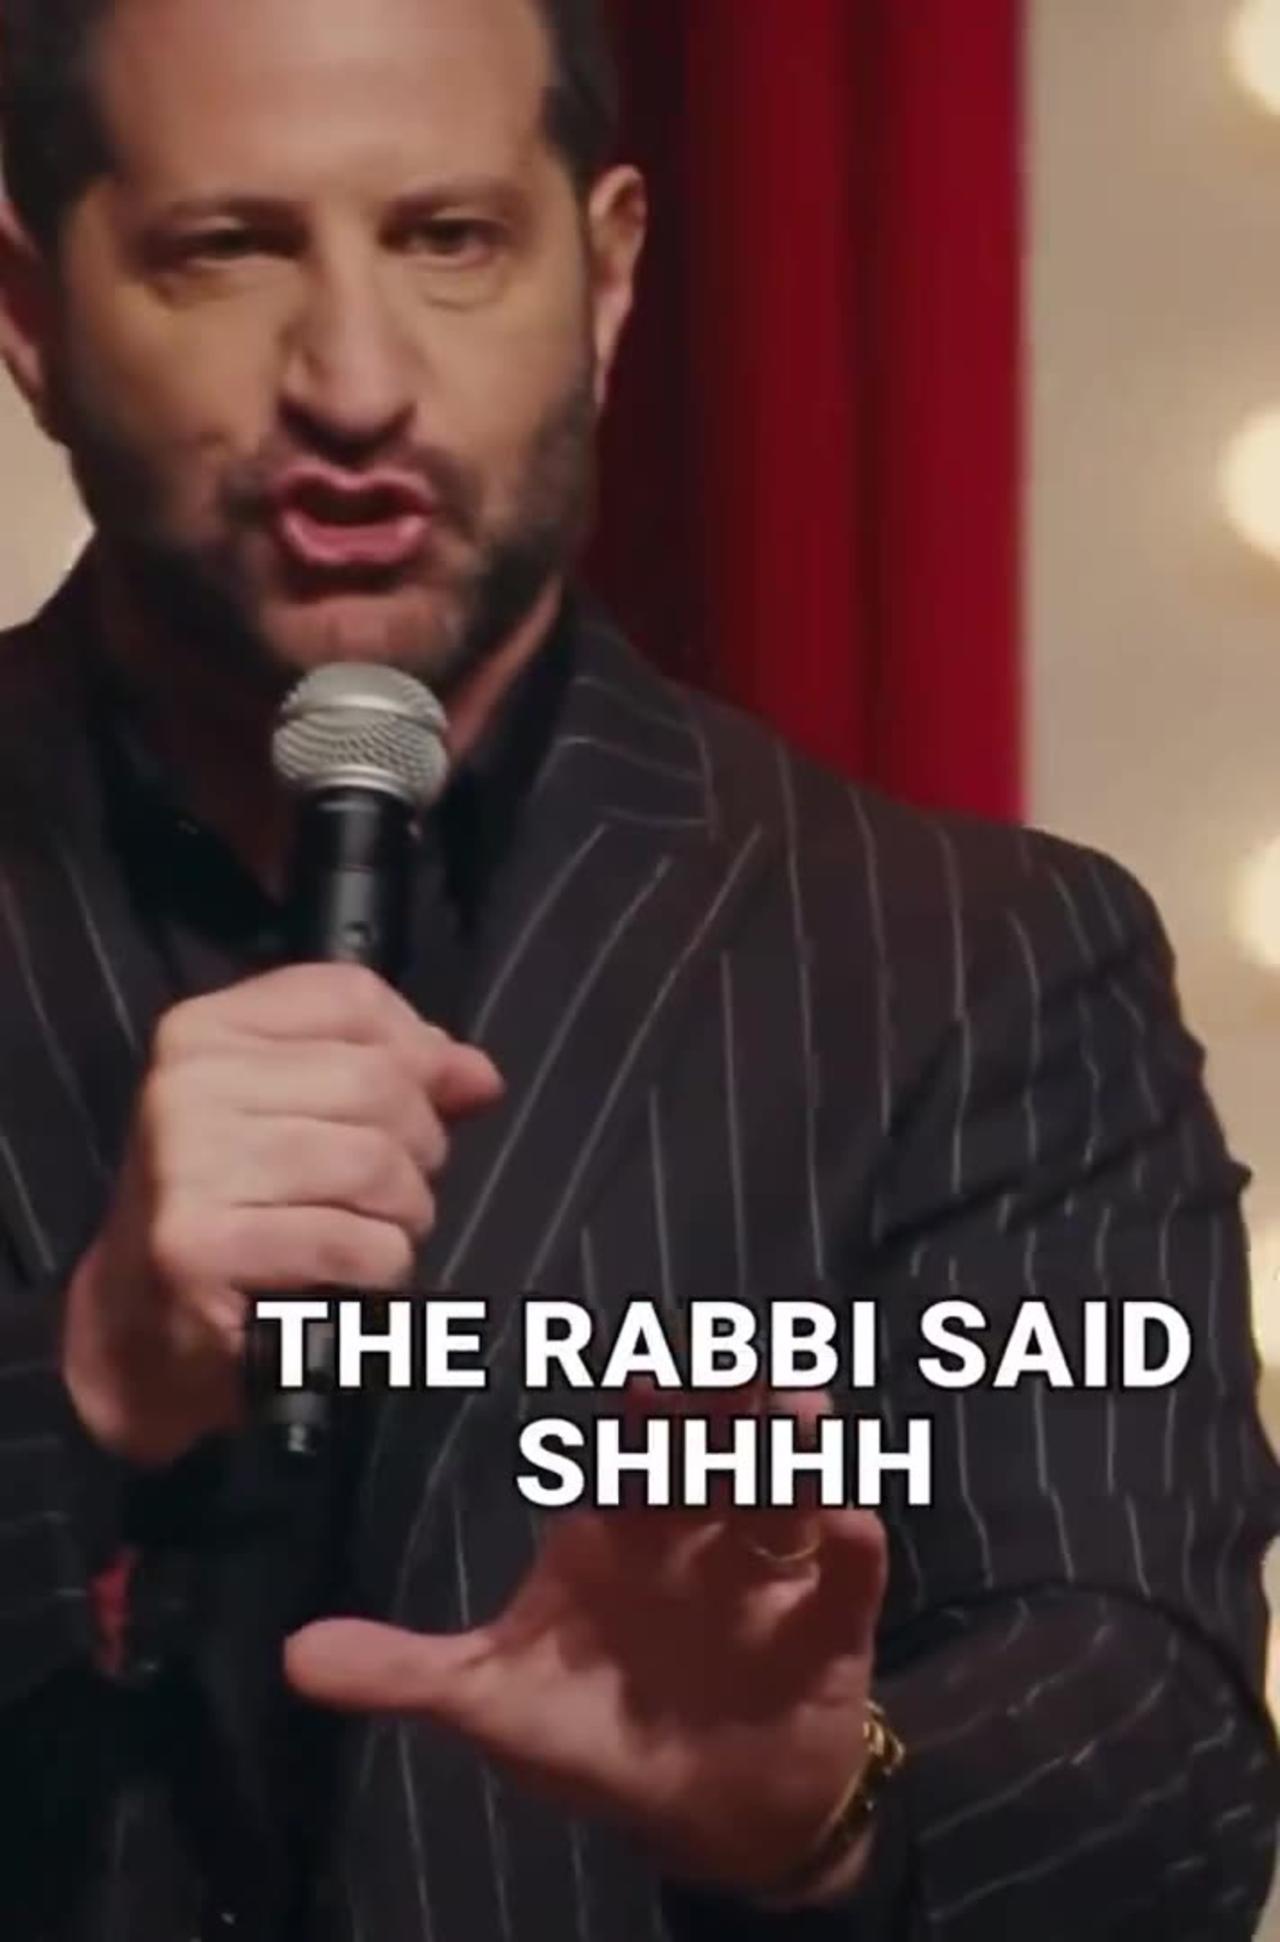 Get ready for the biggest LOL ever: A comedian's hilarious take on a Rabbi joke